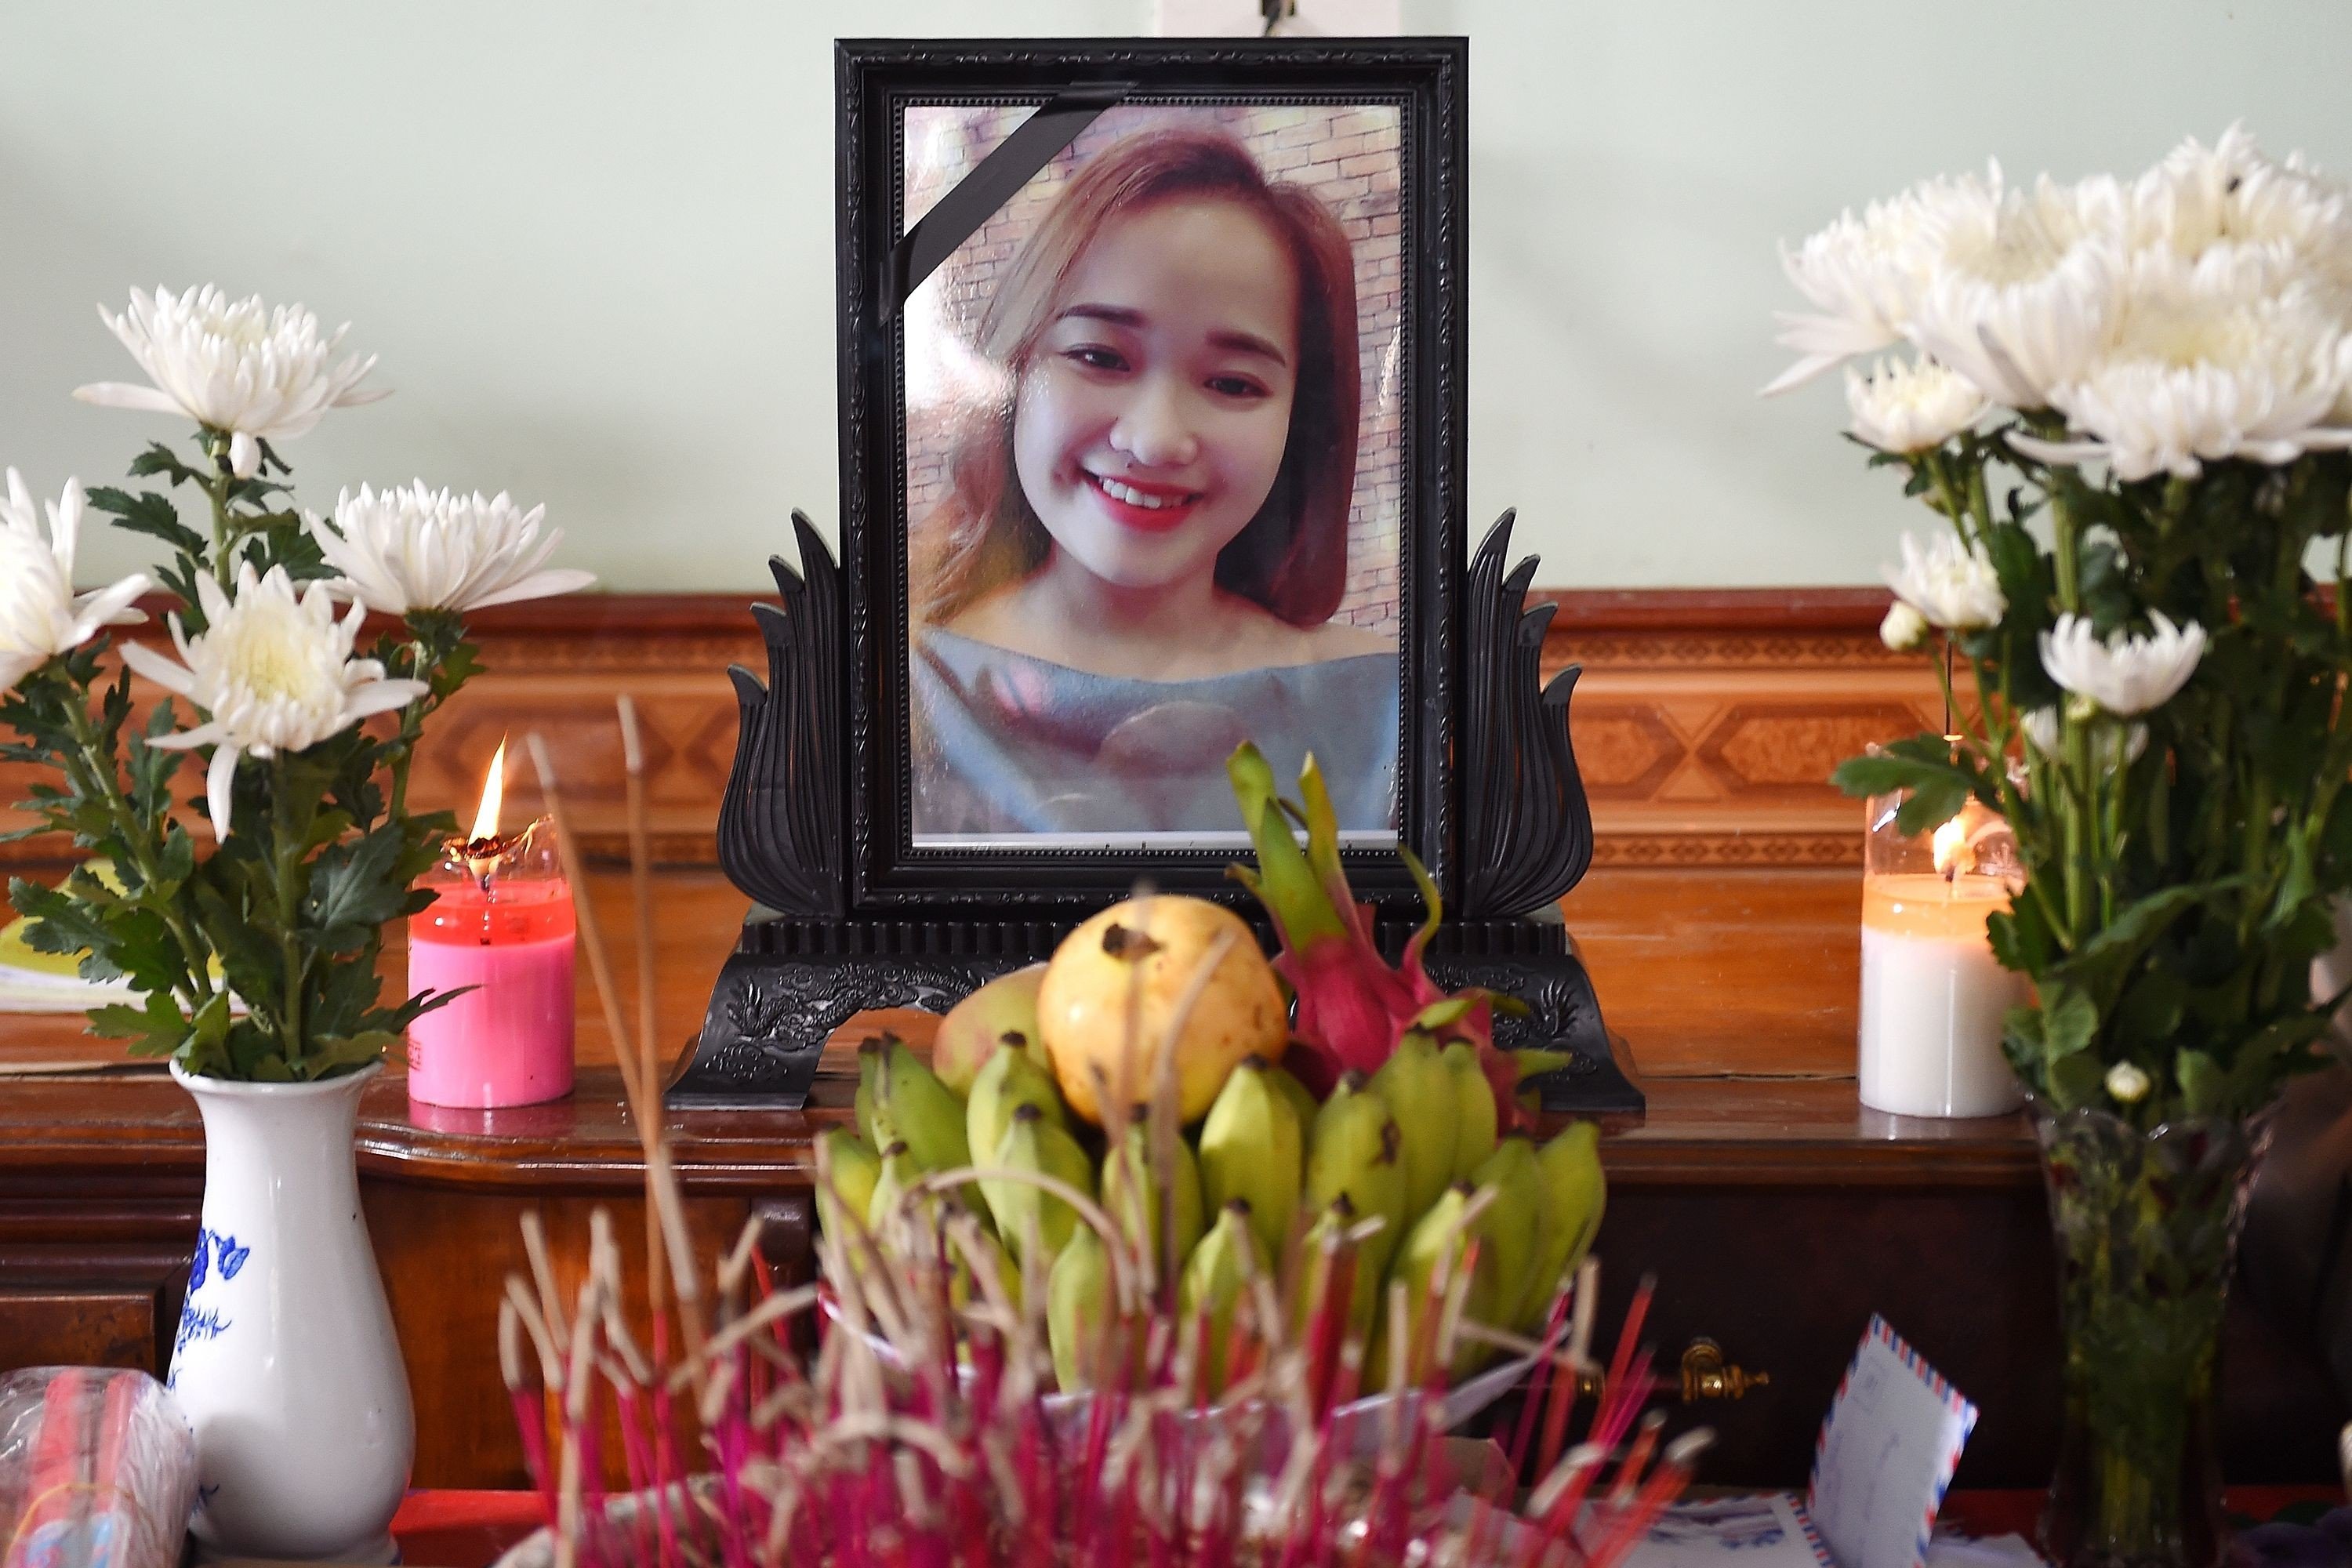 A portrait of Bui Thi Nhung, who is feared to be among the 39 people found dead in a truck in Britain, is kept on a prayer altar at her house in Vietnam's Nghe An province on Wednesday. Photo: AFP